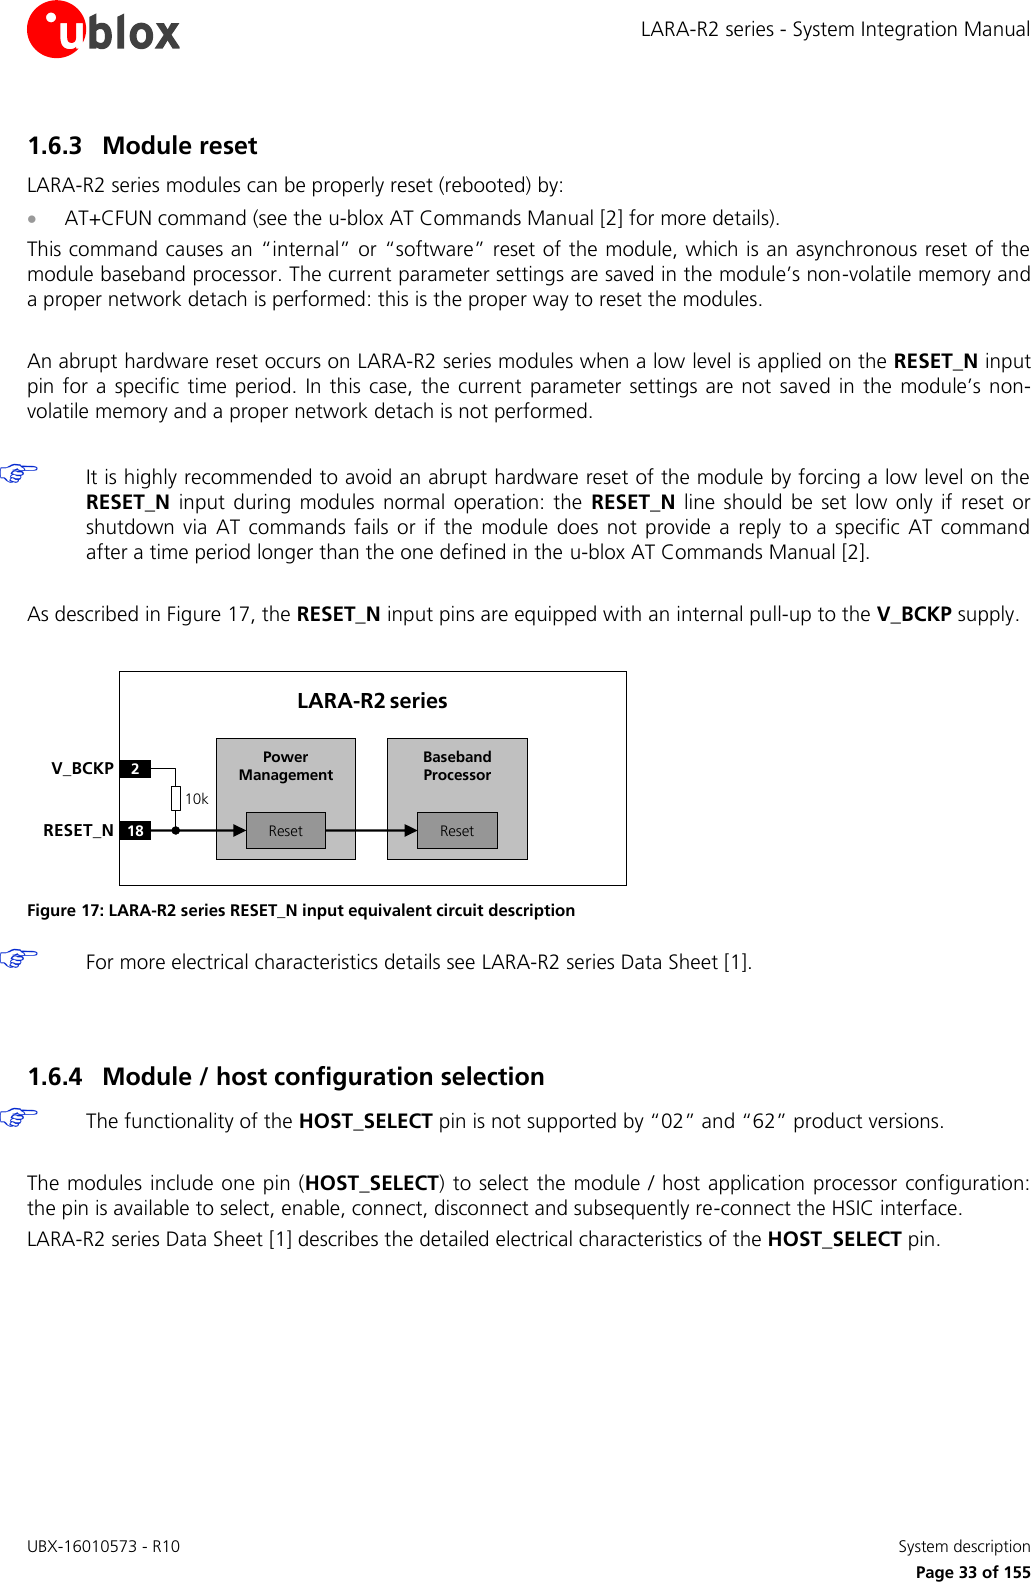 LARA-R2 series - System Integration Manual UBX-16010573 - R10    System description     Page 33 of 155 1.6.3 Module reset LARA-R2 series modules can be properly reset (rebooted) by:  AT+CFUN command (see the u-blox AT Commands Manual [2] for more details). This command causes an “internal” or “software” reset of the module, which is an asynchronous reset of the module baseband processor. The current parameter settings are saved in the module’s non-volatile memory and a proper network detach is performed: this is the proper way to reset the modules.  An abrupt hardware reset occurs on LARA-R2 series modules when a low level is applied on the RESET_N input pin for a  specific time  period. In this case, the current  parameter  settings are  not saved in the  module’s non-volatile memory and a proper network detach is not performed.   It is highly recommended to avoid an abrupt hardware reset of the module by forcing a low level on the RESET_N  input during  modules normal operation: the  RESET_N line  should  be set low  only  if  reset  or shutdown  via  AT commands fails  or  if  the  module  does not  provide  a  reply to a  specific  AT  command after a time period longer than the one defined in the u-blox AT Commands Manual [2].  As described in Figure 17, the RESET_N input pins are equipped with an internal pull-up to the V_BCKP supply.  Baseband Processor18RESET_NLARA-R2 series2V_BCKPResetPower ManagementReset10k Figure 17: LARA-R2 series RESET_N input equivalent circuit description  For more electrical characteristics details see LARA-R2 series Data Sheet [1].   1.6.4 Module / host configuration selection   The functionality of the HOST_SELECT pin is not supported by “02” and “62” product versions.  The modules include one pin (HOST_SELECT) to select the module / host application processor configuration: the pin is available to select, enable, connect, disconnect and subsequently re-connect the HSIC interface. LARA-R2 series Data Sheet [1] describes the detailed electrical characteristics of the HOST_SELECT pin.   